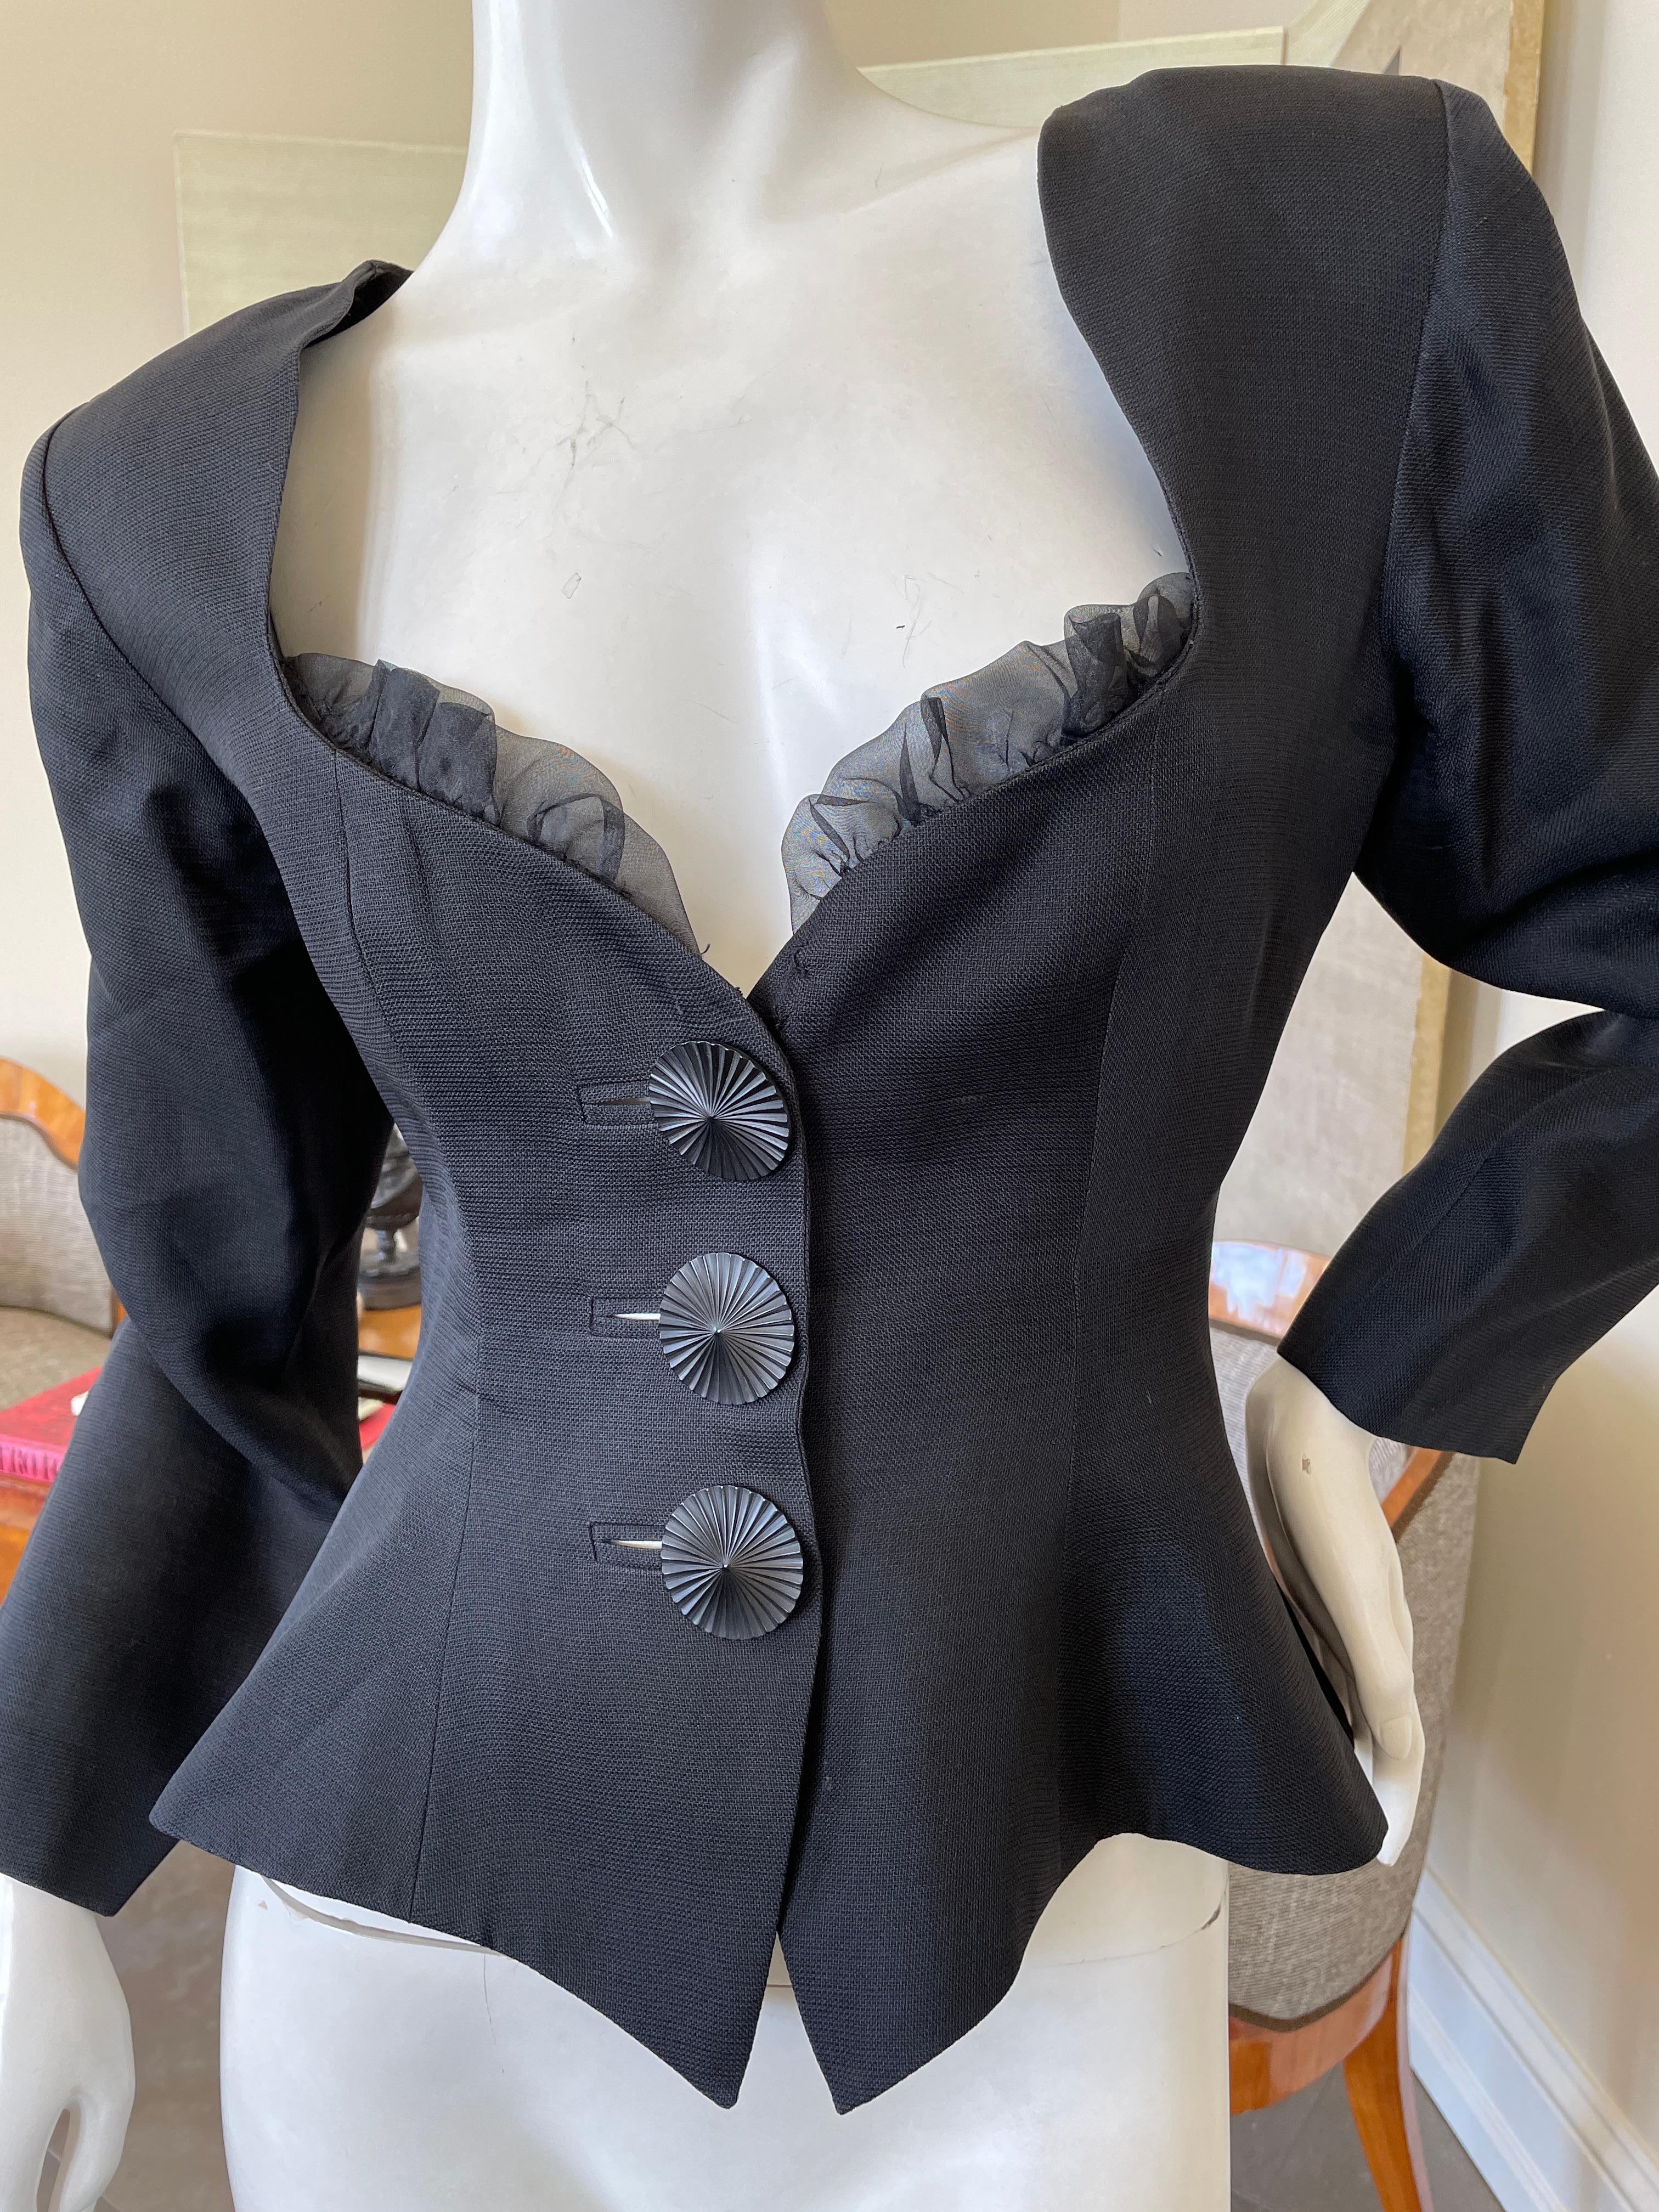 Yves Saint Laurent Rive Gauche 1970's Low Cut Black Silk Top In Excellent Condition For Sale In Cloverdale, CA